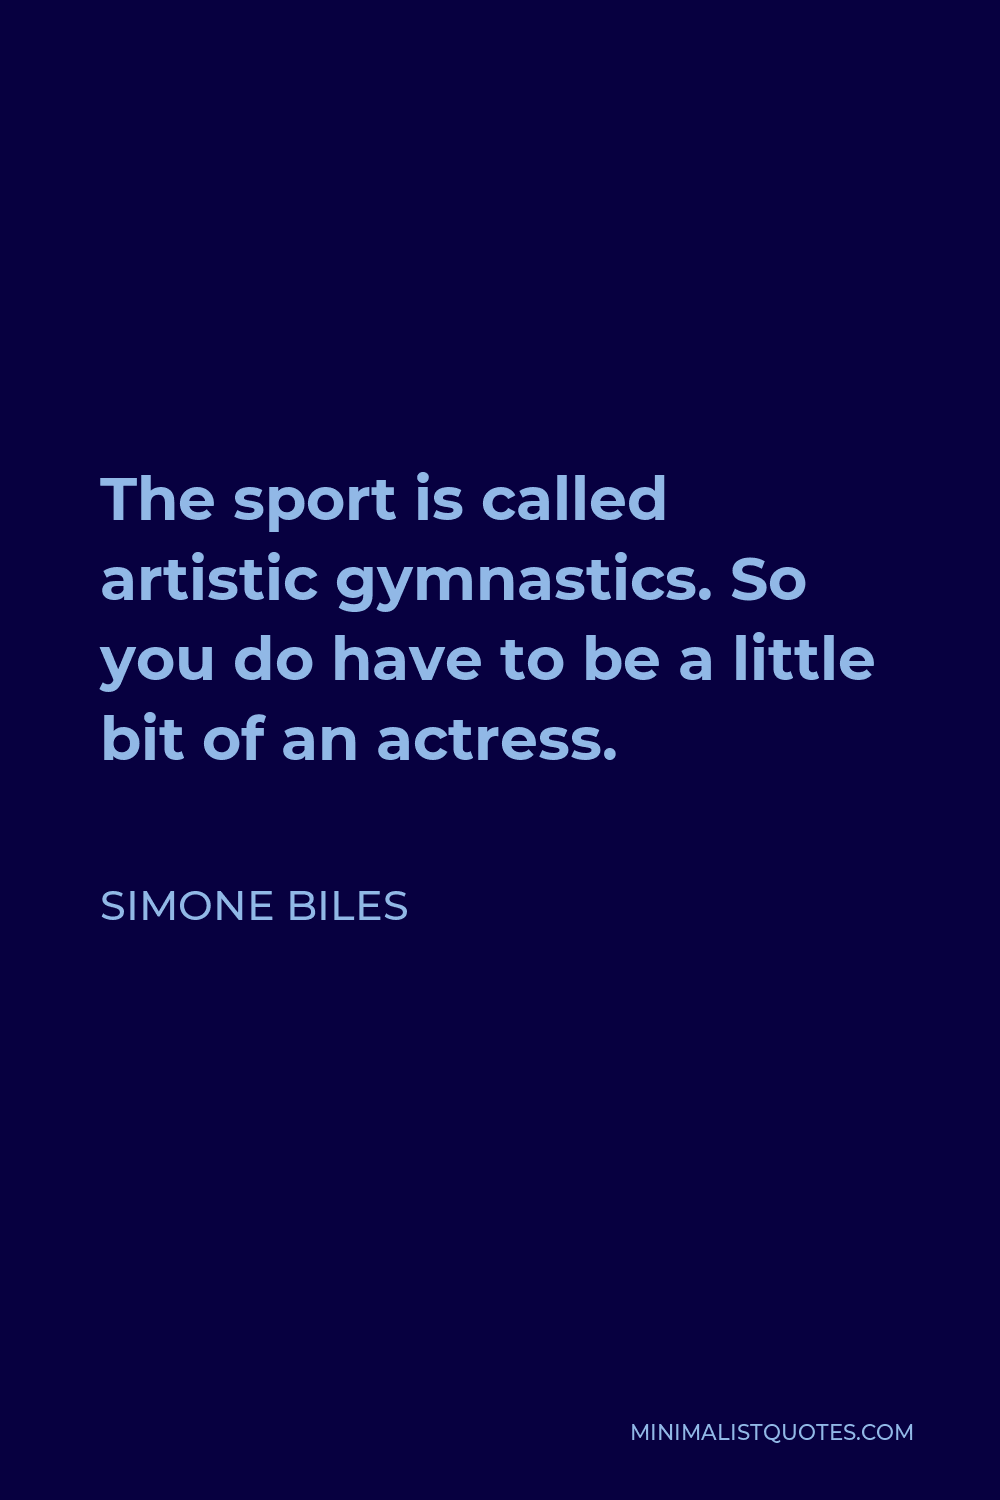 Simone Biles Quote - The sport is called artistic gymnastics. So you do have to be a little bit of an actress.